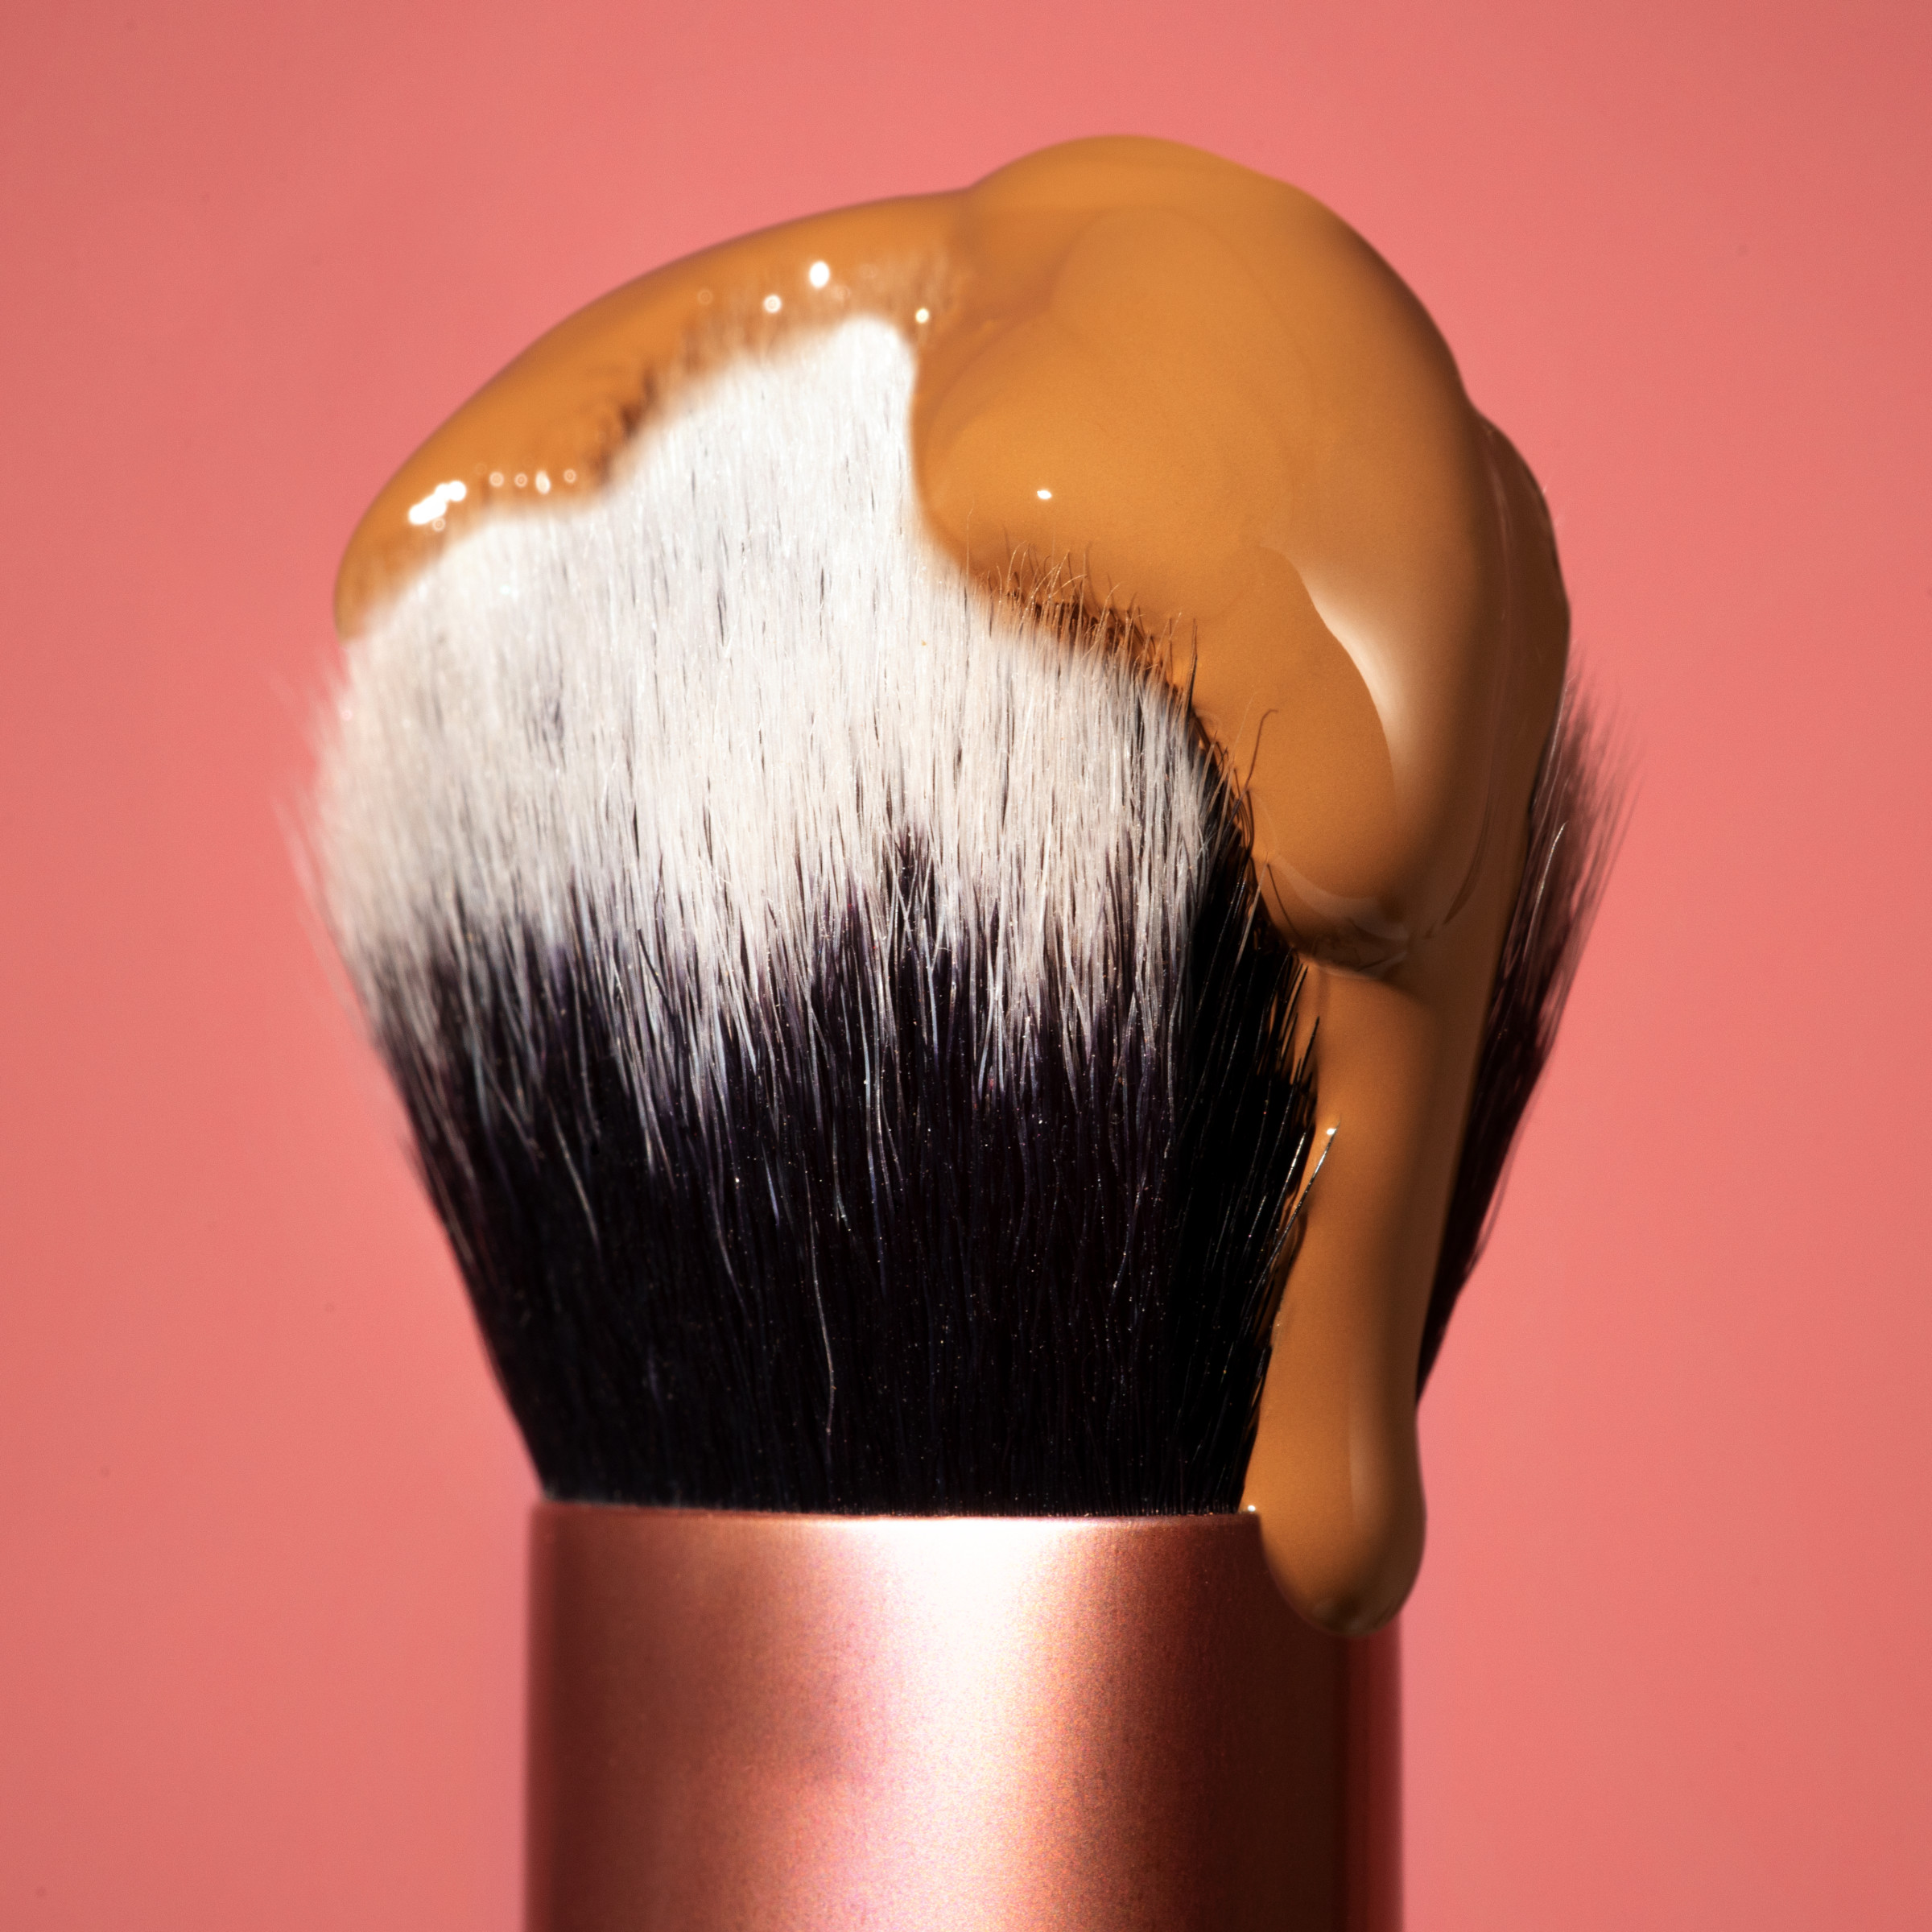 Real Techniques Expert Face Makeup Brush, Foundation Blending Brush, 1 Count - image 6 of 11